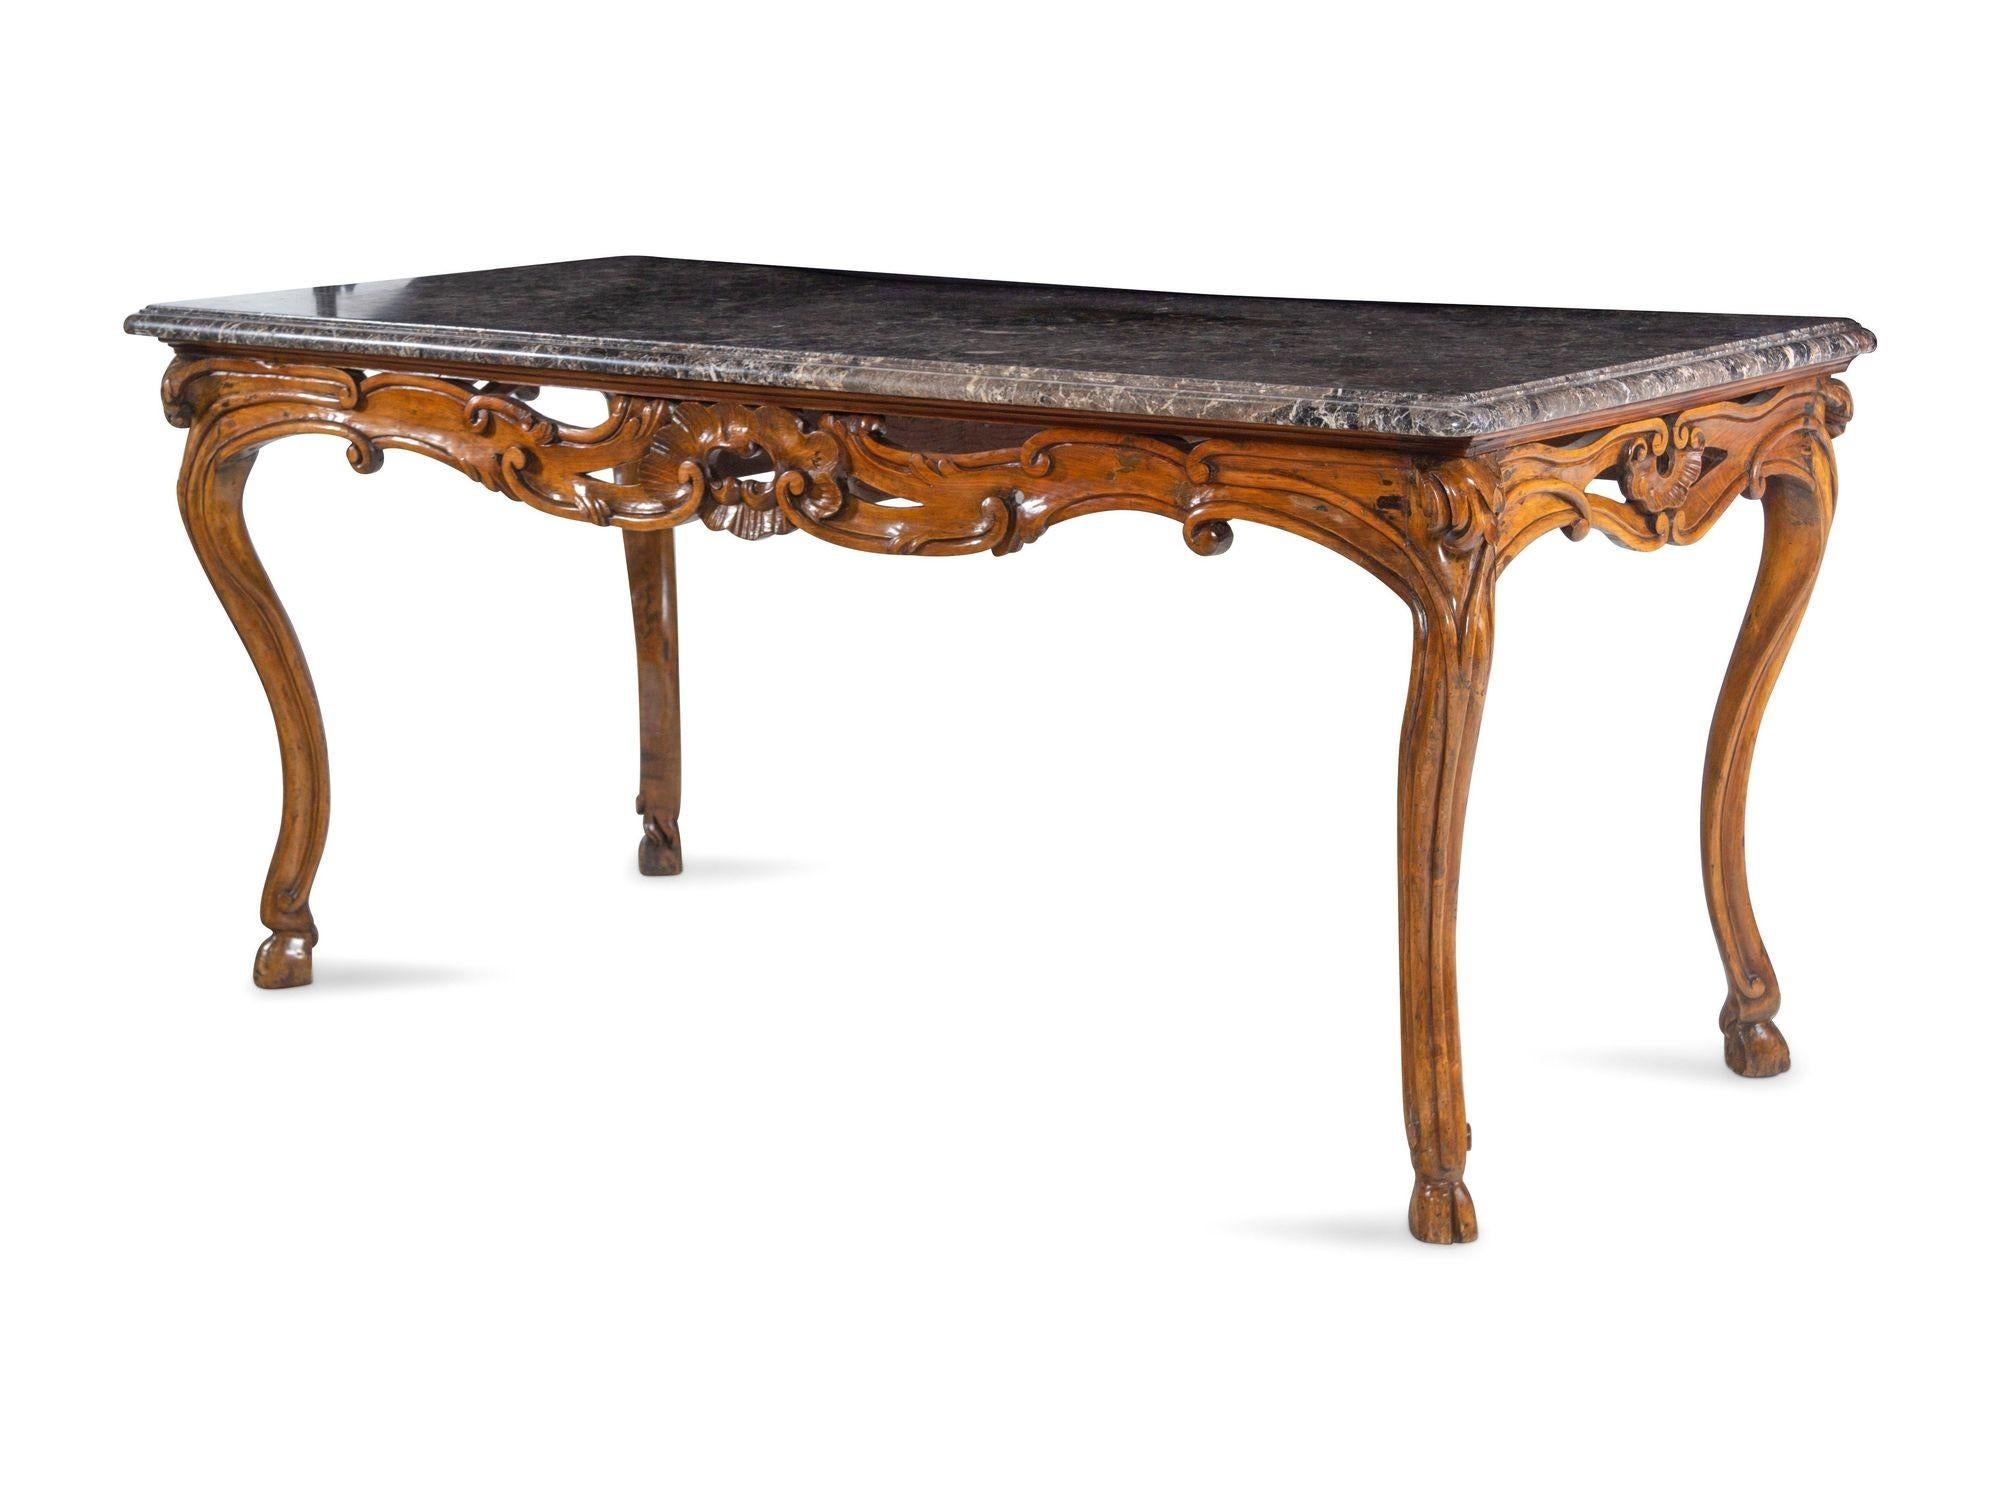 Hand carved walnut console with marble top. Made in France, 18th Century.
Dimensions: 
37